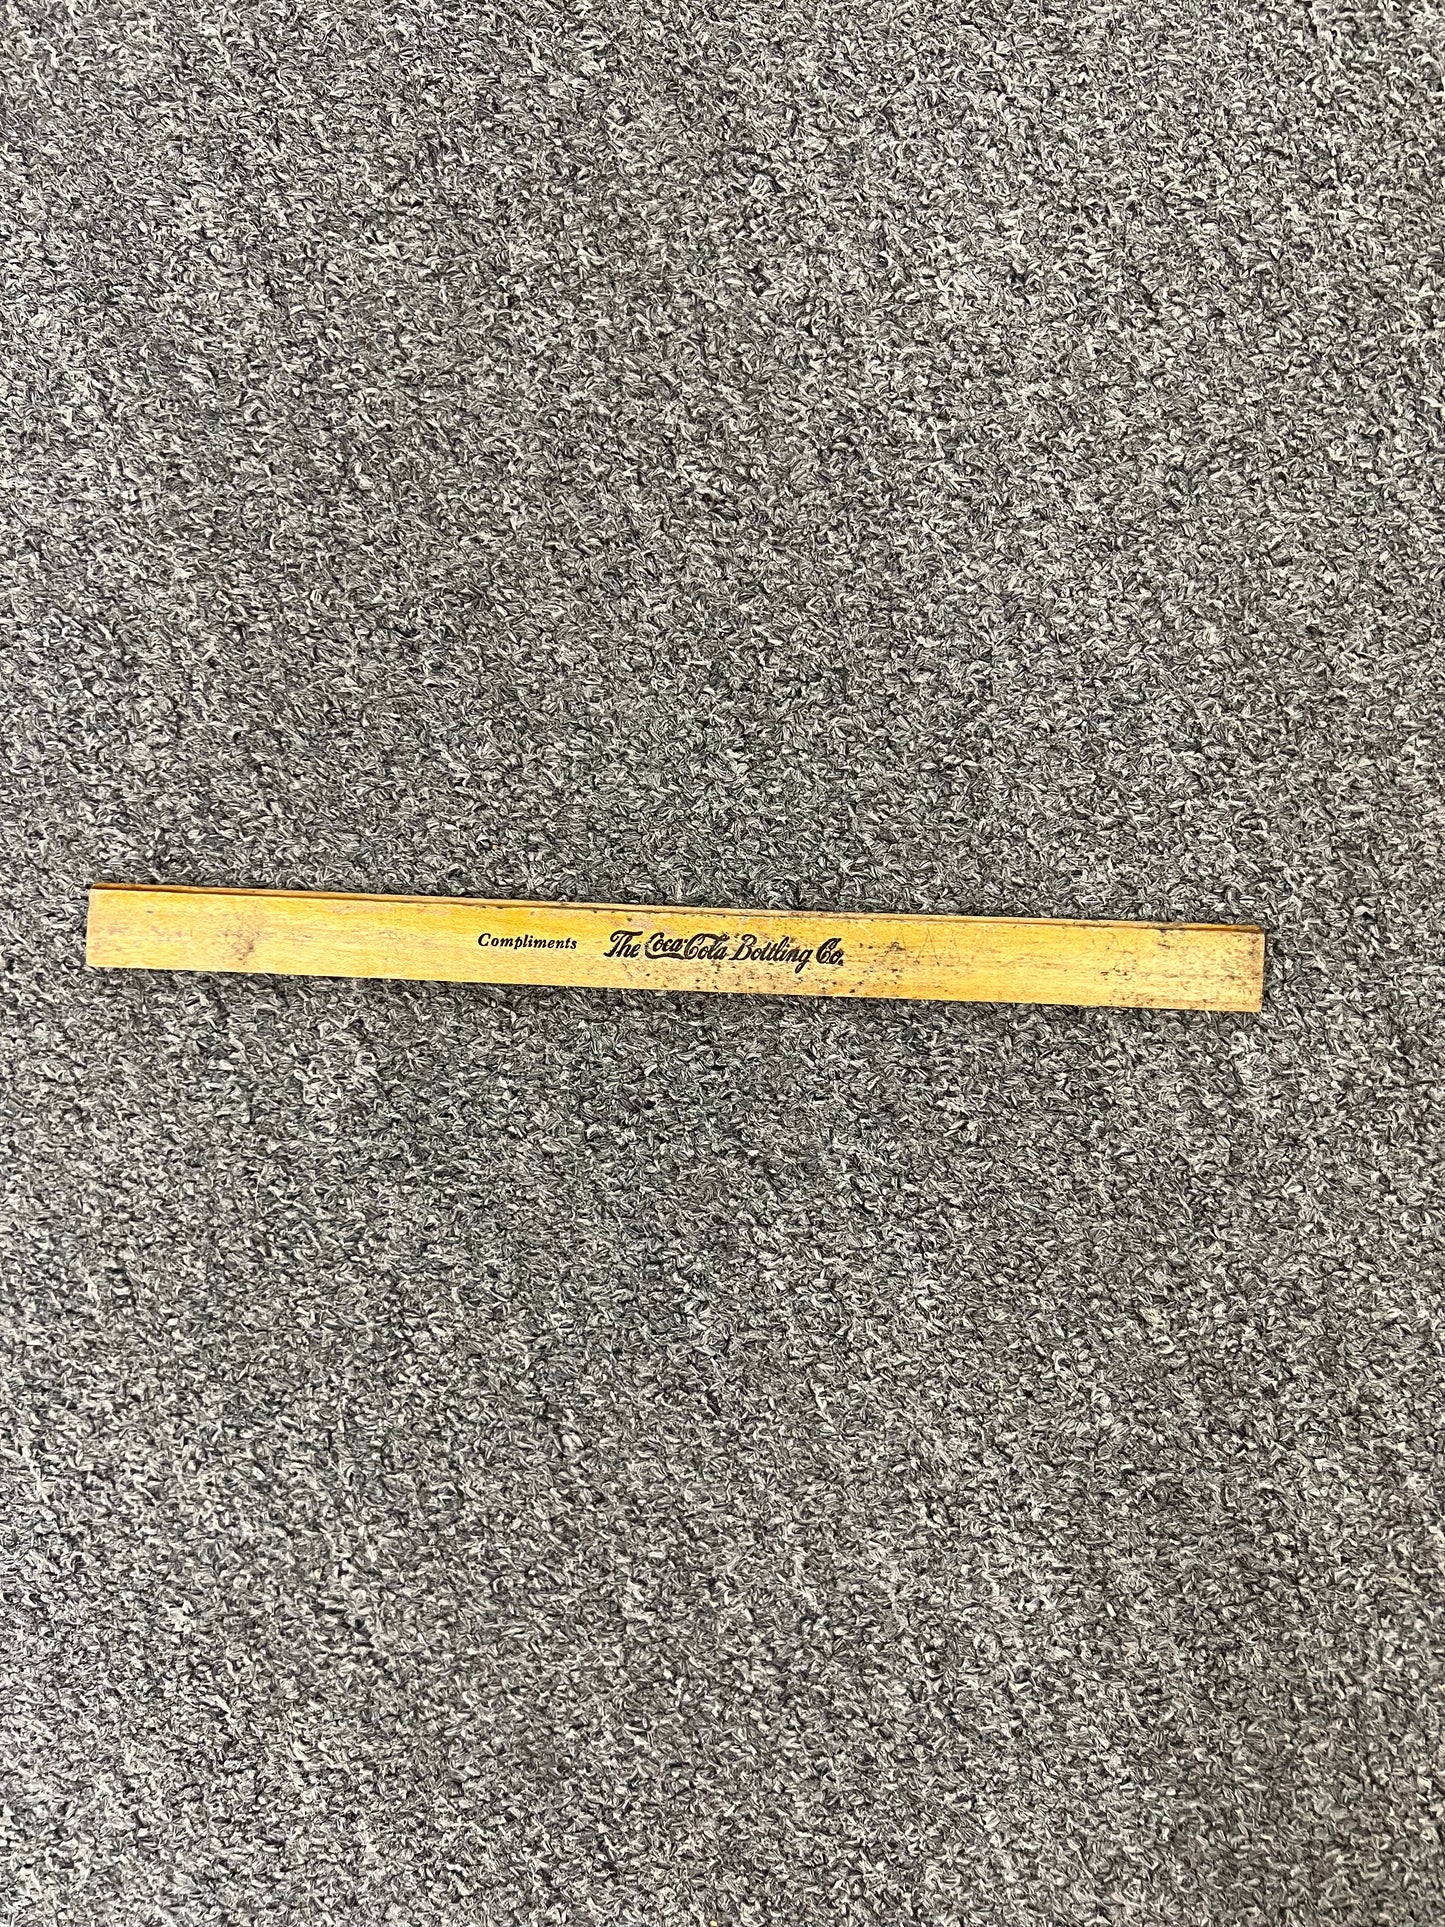 Vintage 1940s Coca Cola Wood Ruler Featuring the Golden Rule